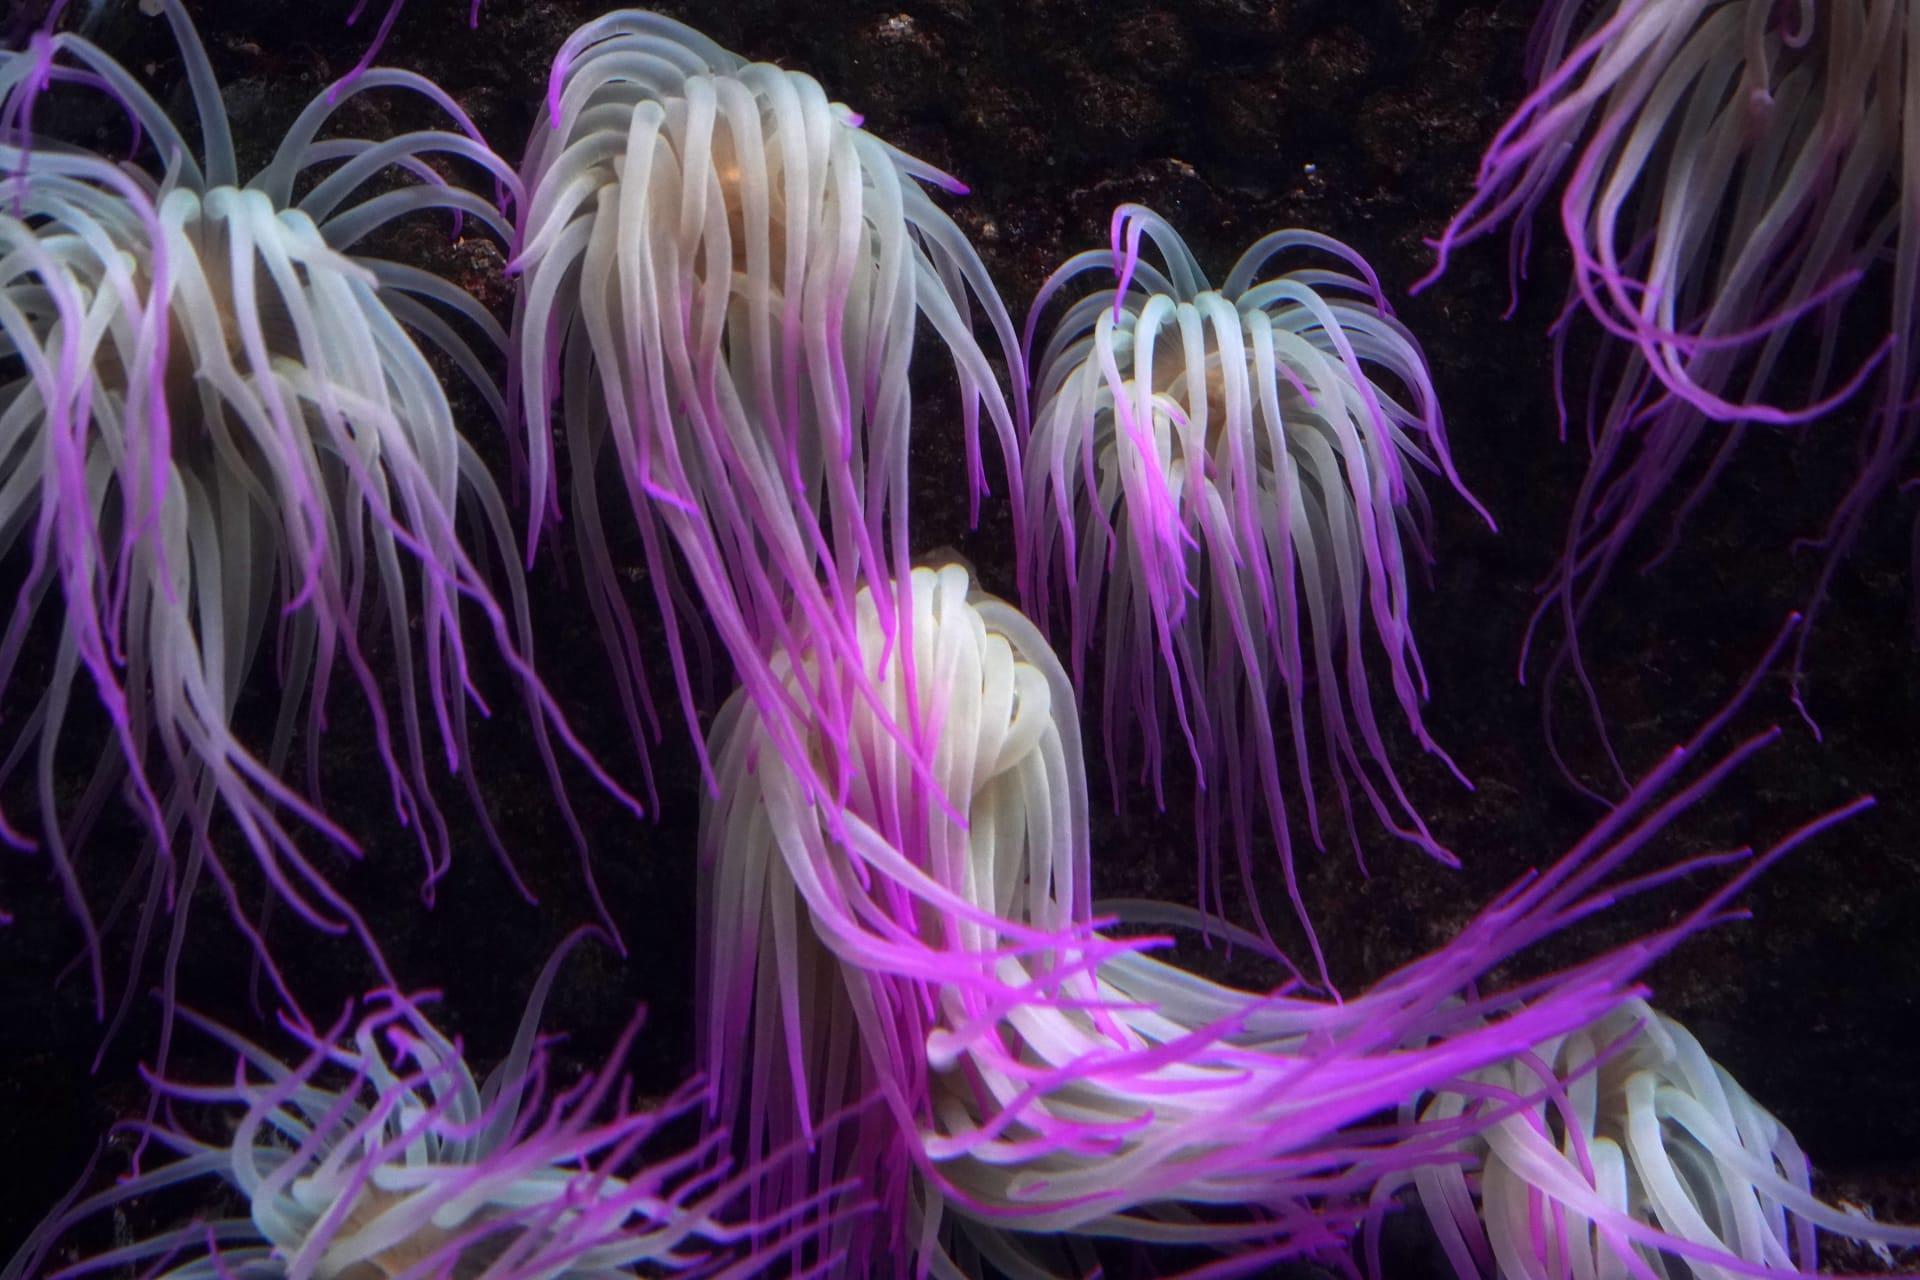 Tube anemone pictures